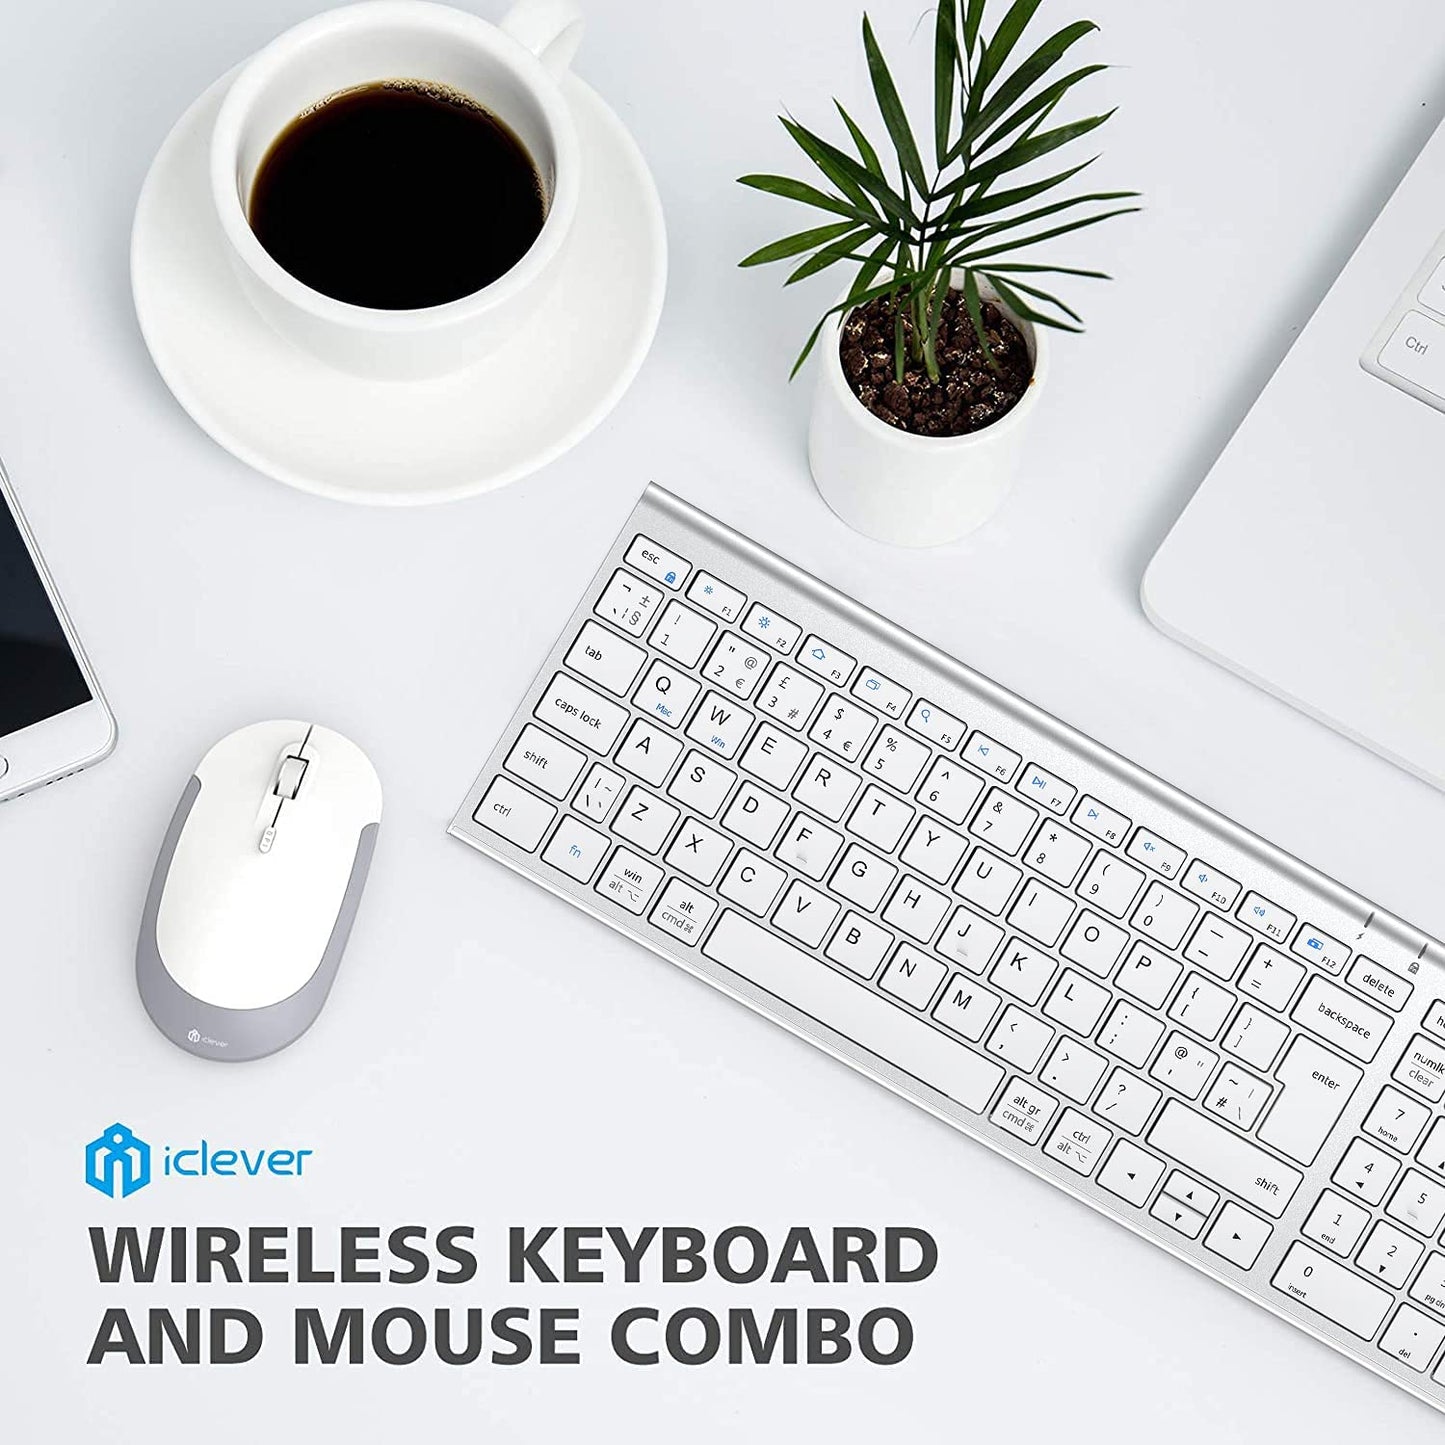 iClever GK03 Wireless Keyboard and Mouse Combo - 2.4G Portable Wireless Keyboard Mouse, Rechargeable Full Size Slim Thin Stable, Silver